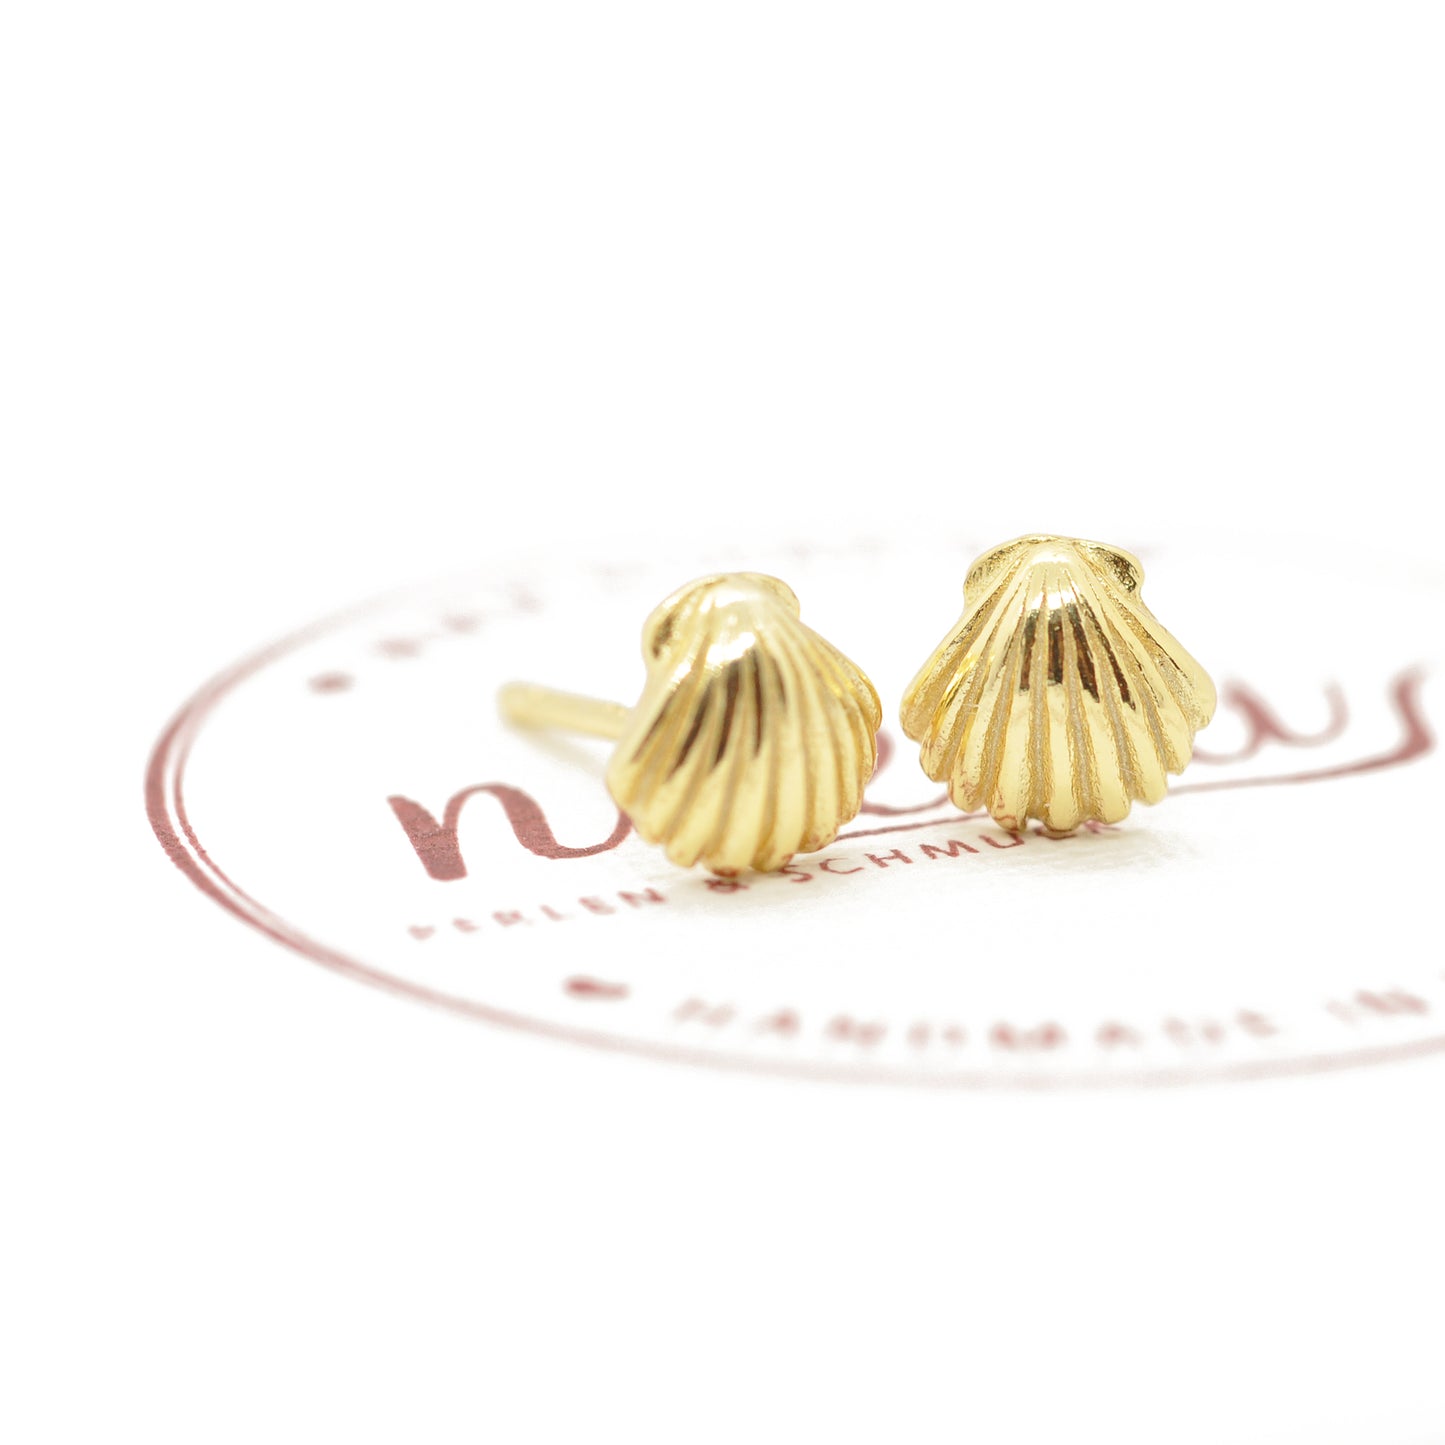 Ear studs shell / 925 silver gold plated